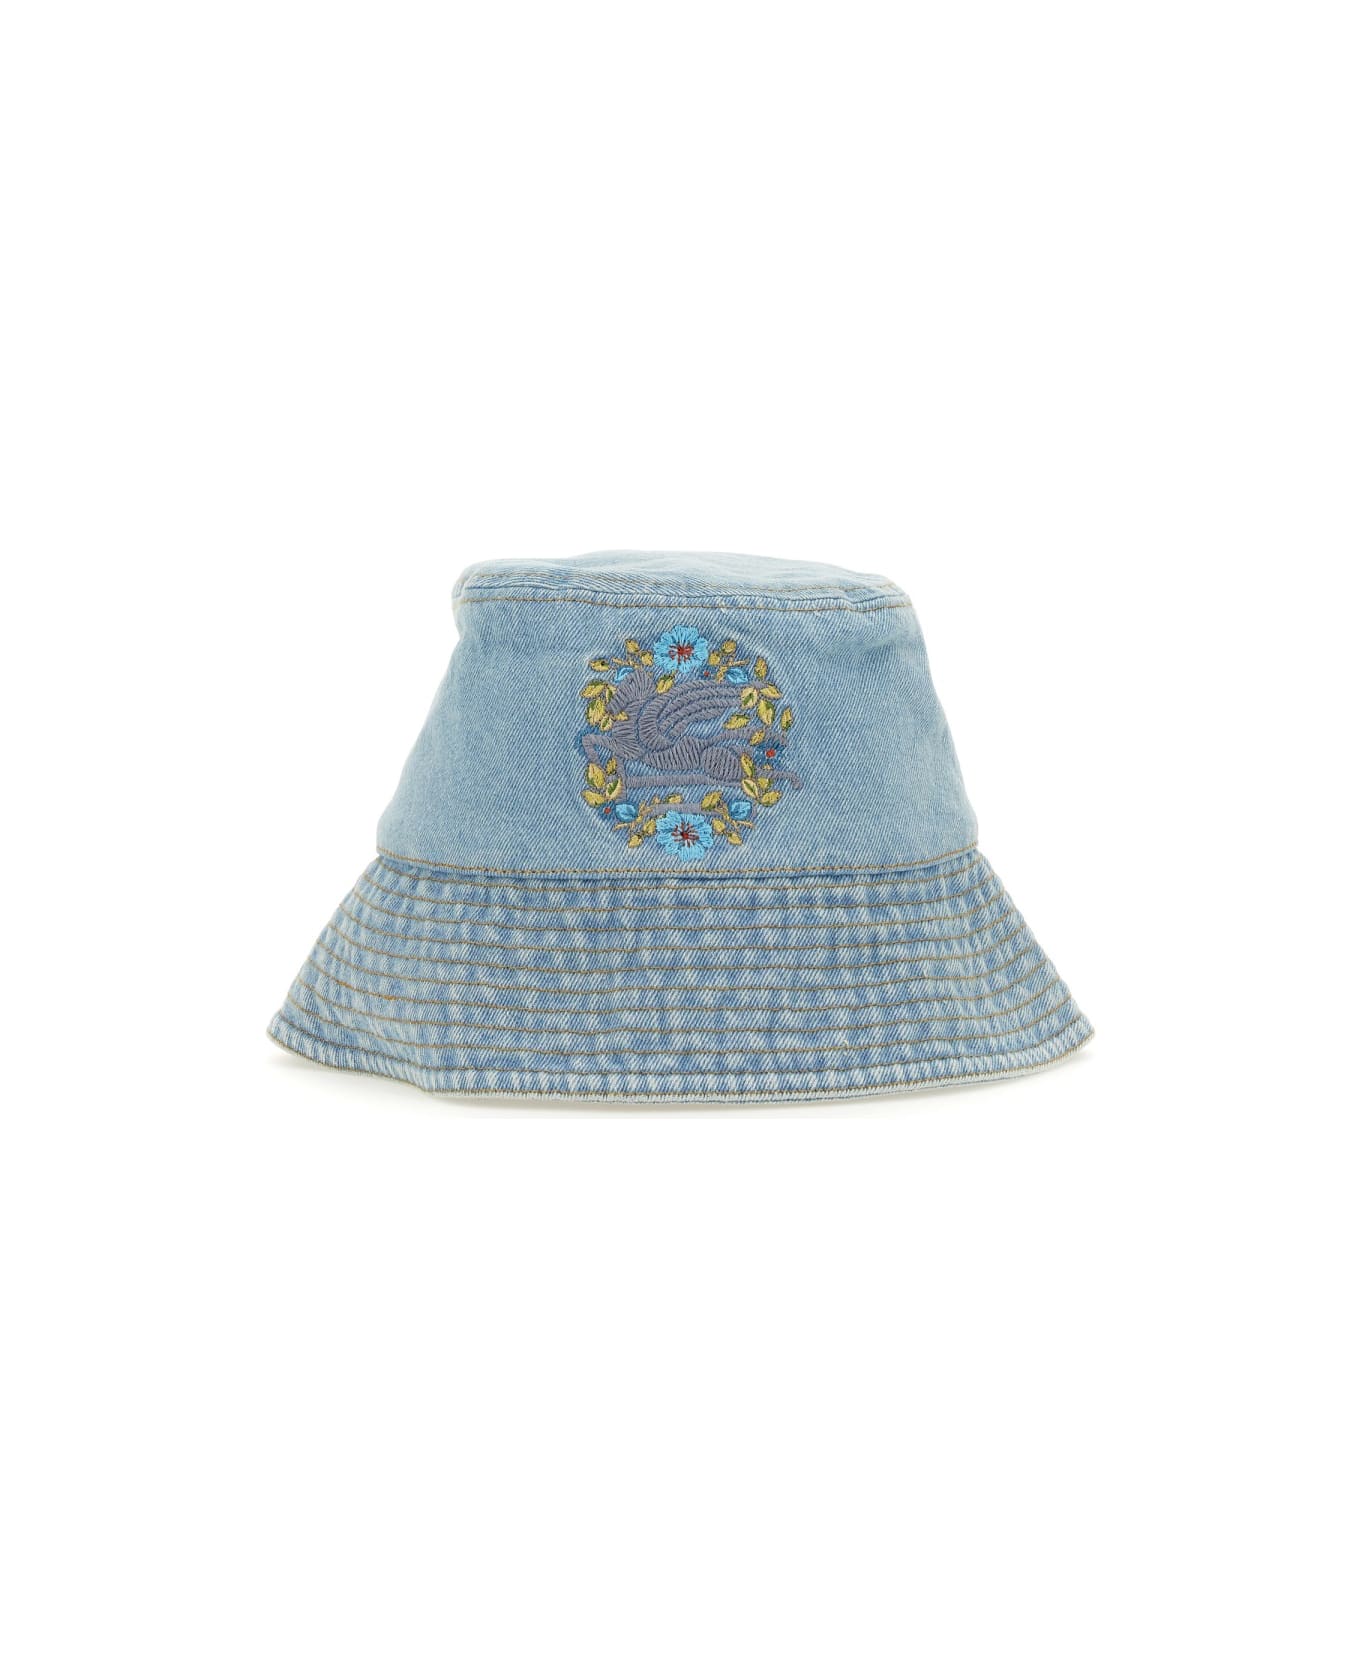 Etro Denim Bucket Hat With Embroidery - Blue